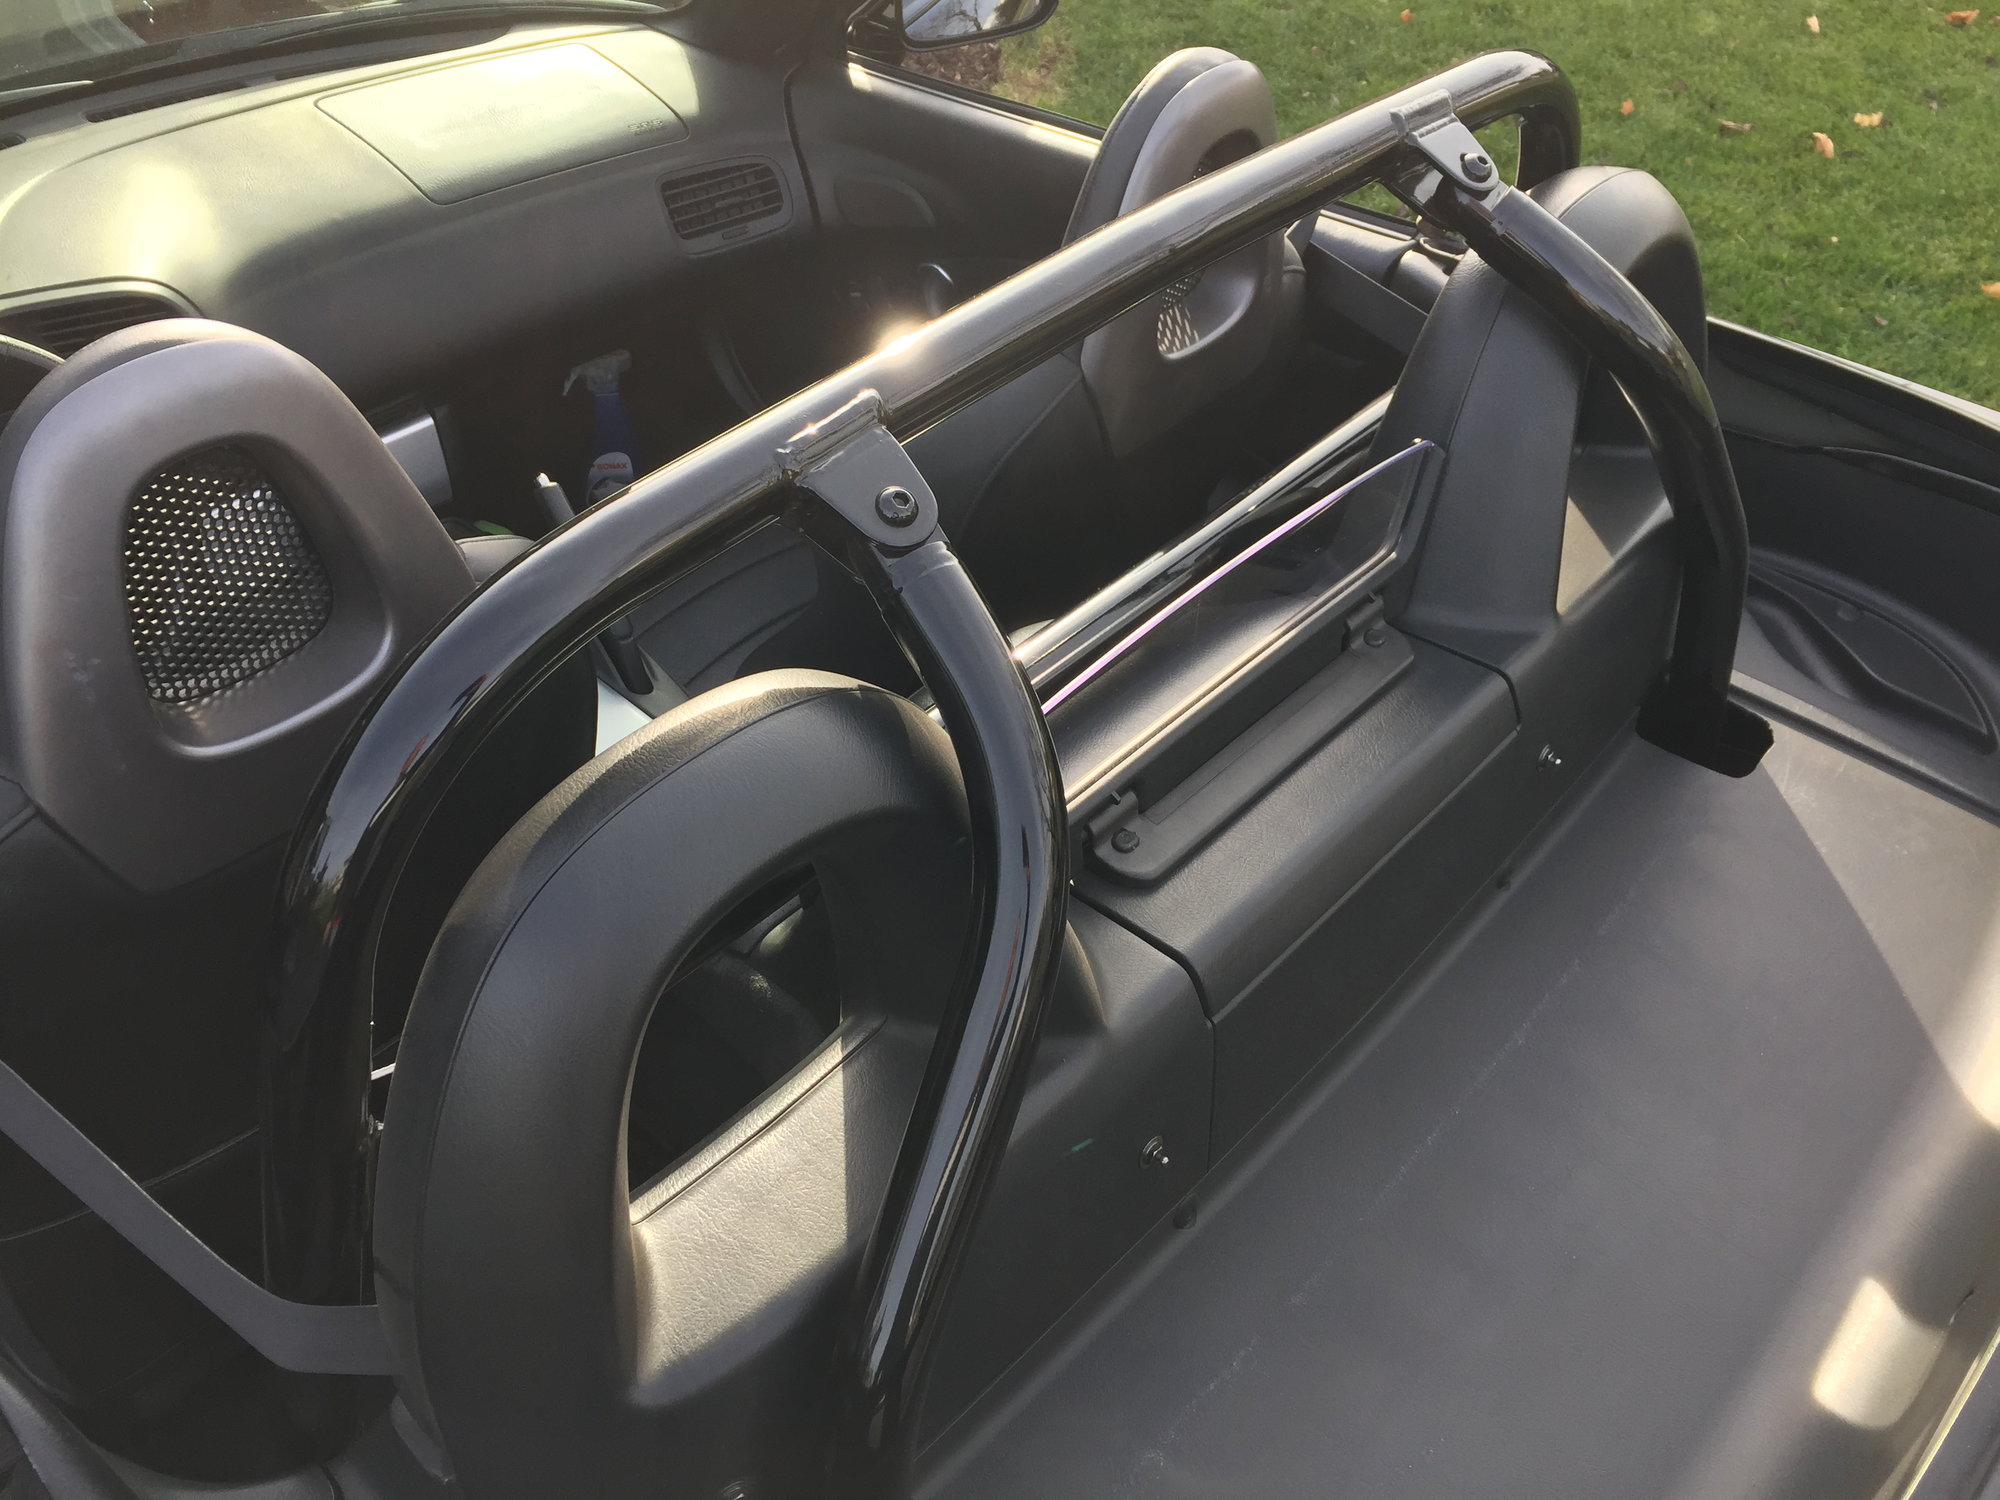 FS: Safety 21 4 Point Roll Bar w/ Harness Bar (removable) .